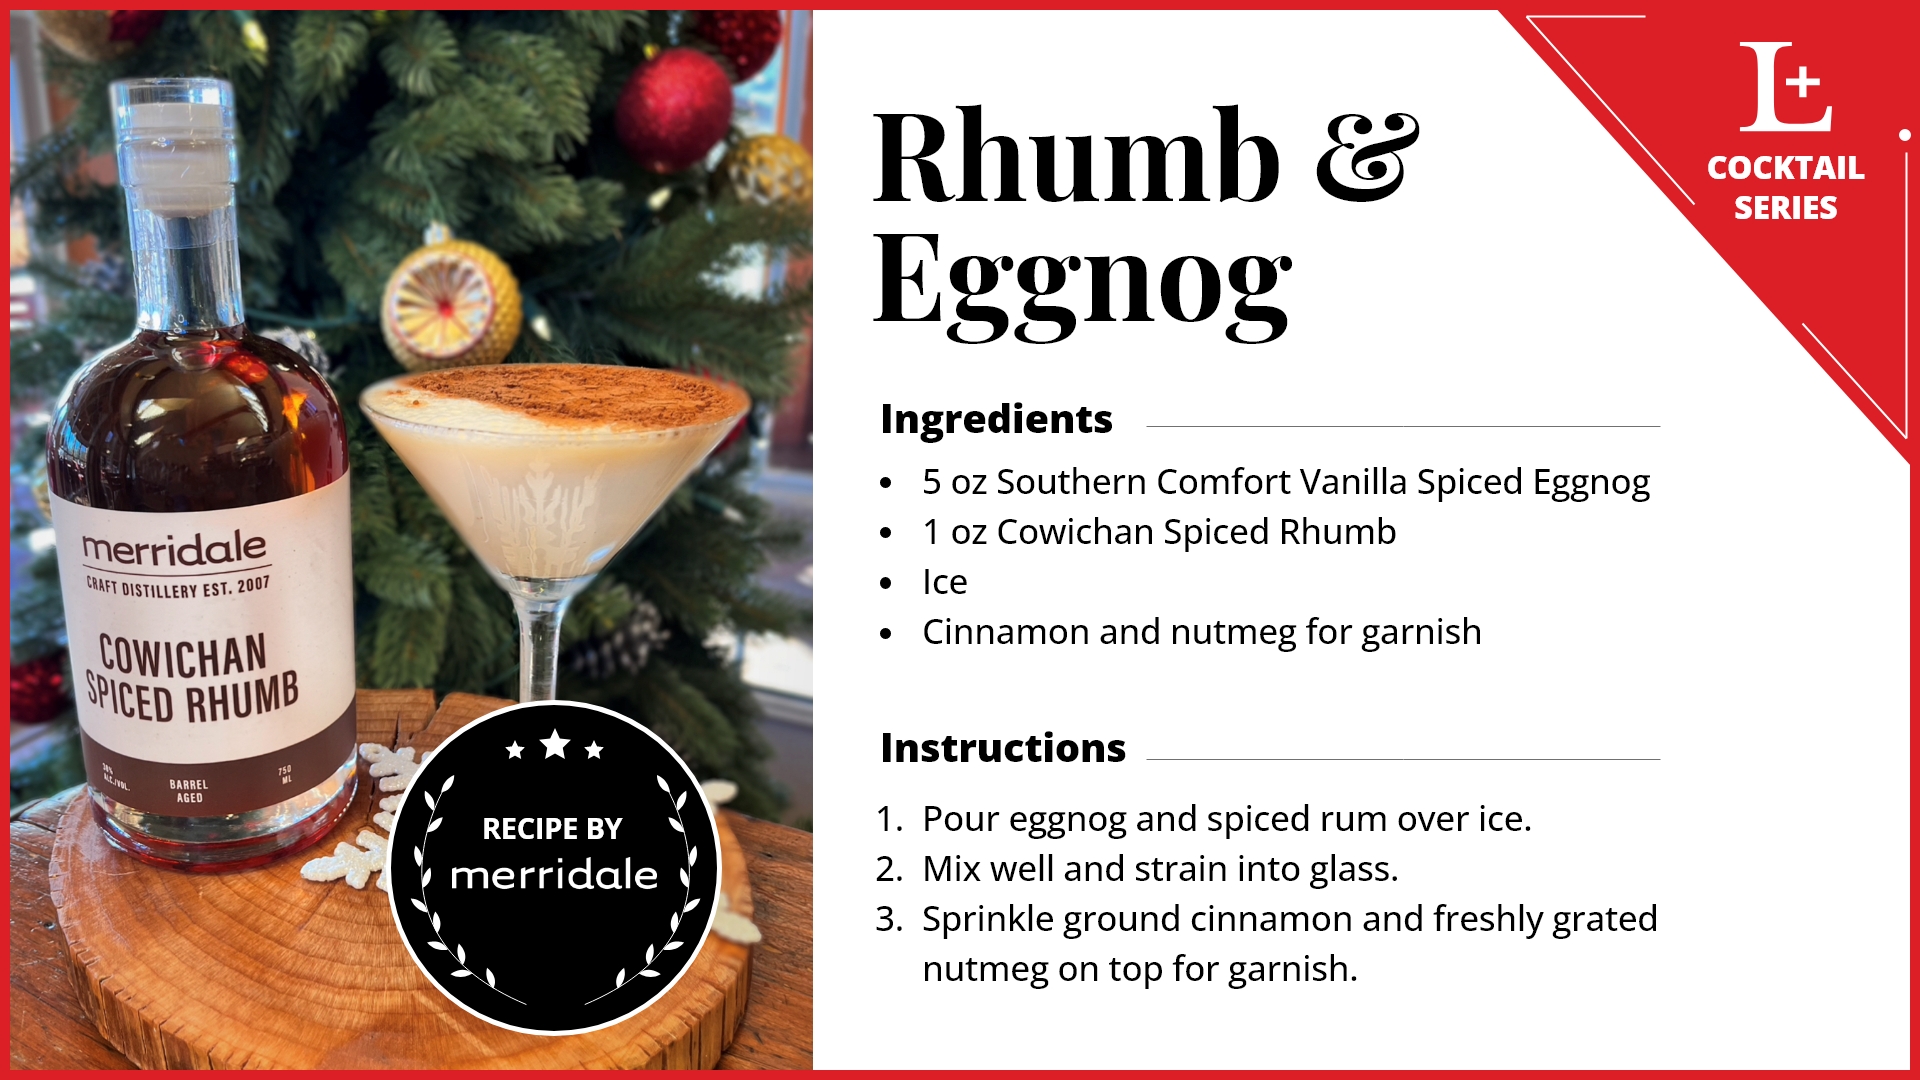 Rhumb and Eggnog ingredients and instructions